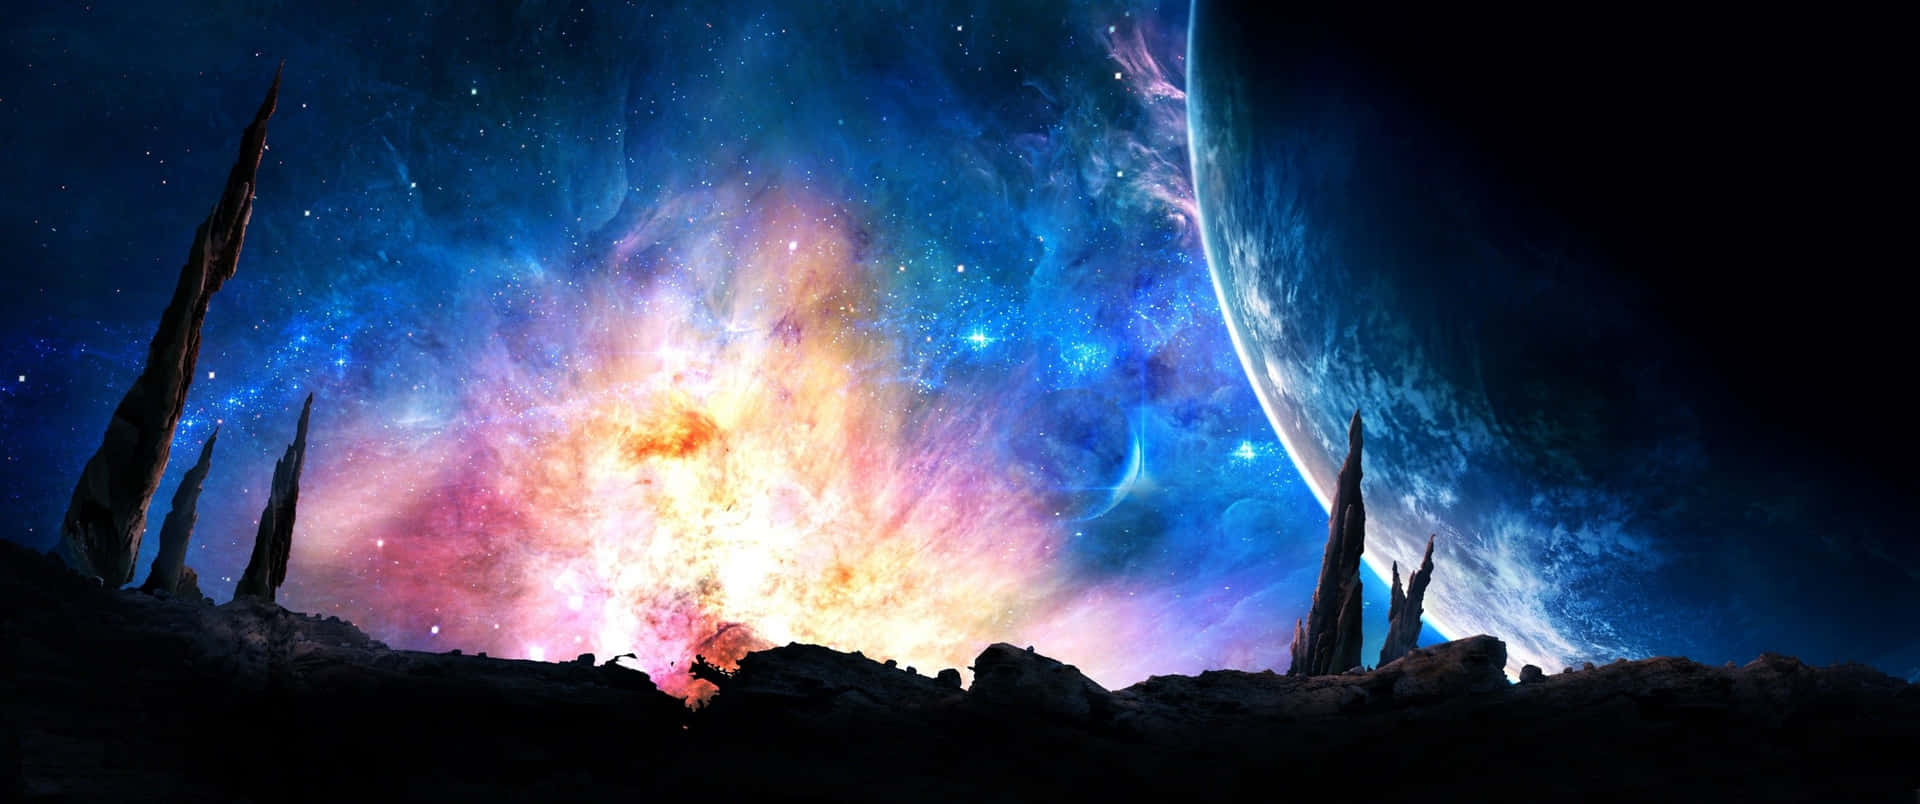 3440x1440 Space Rising Planet In Galaxy Wallpaper